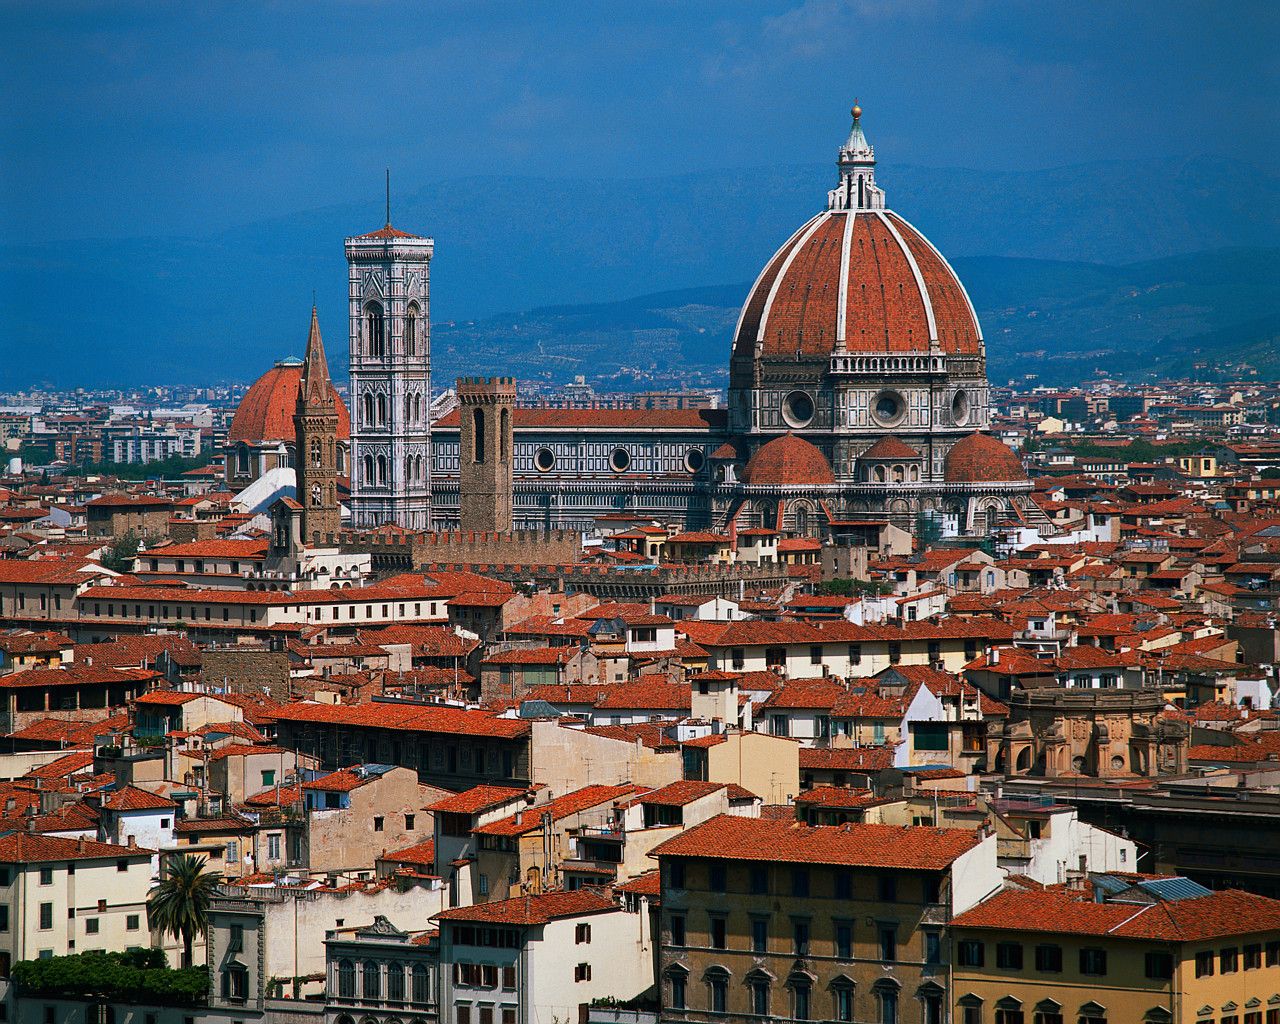 Buildings City Florence Italy Desktop Wallpaper Nr By